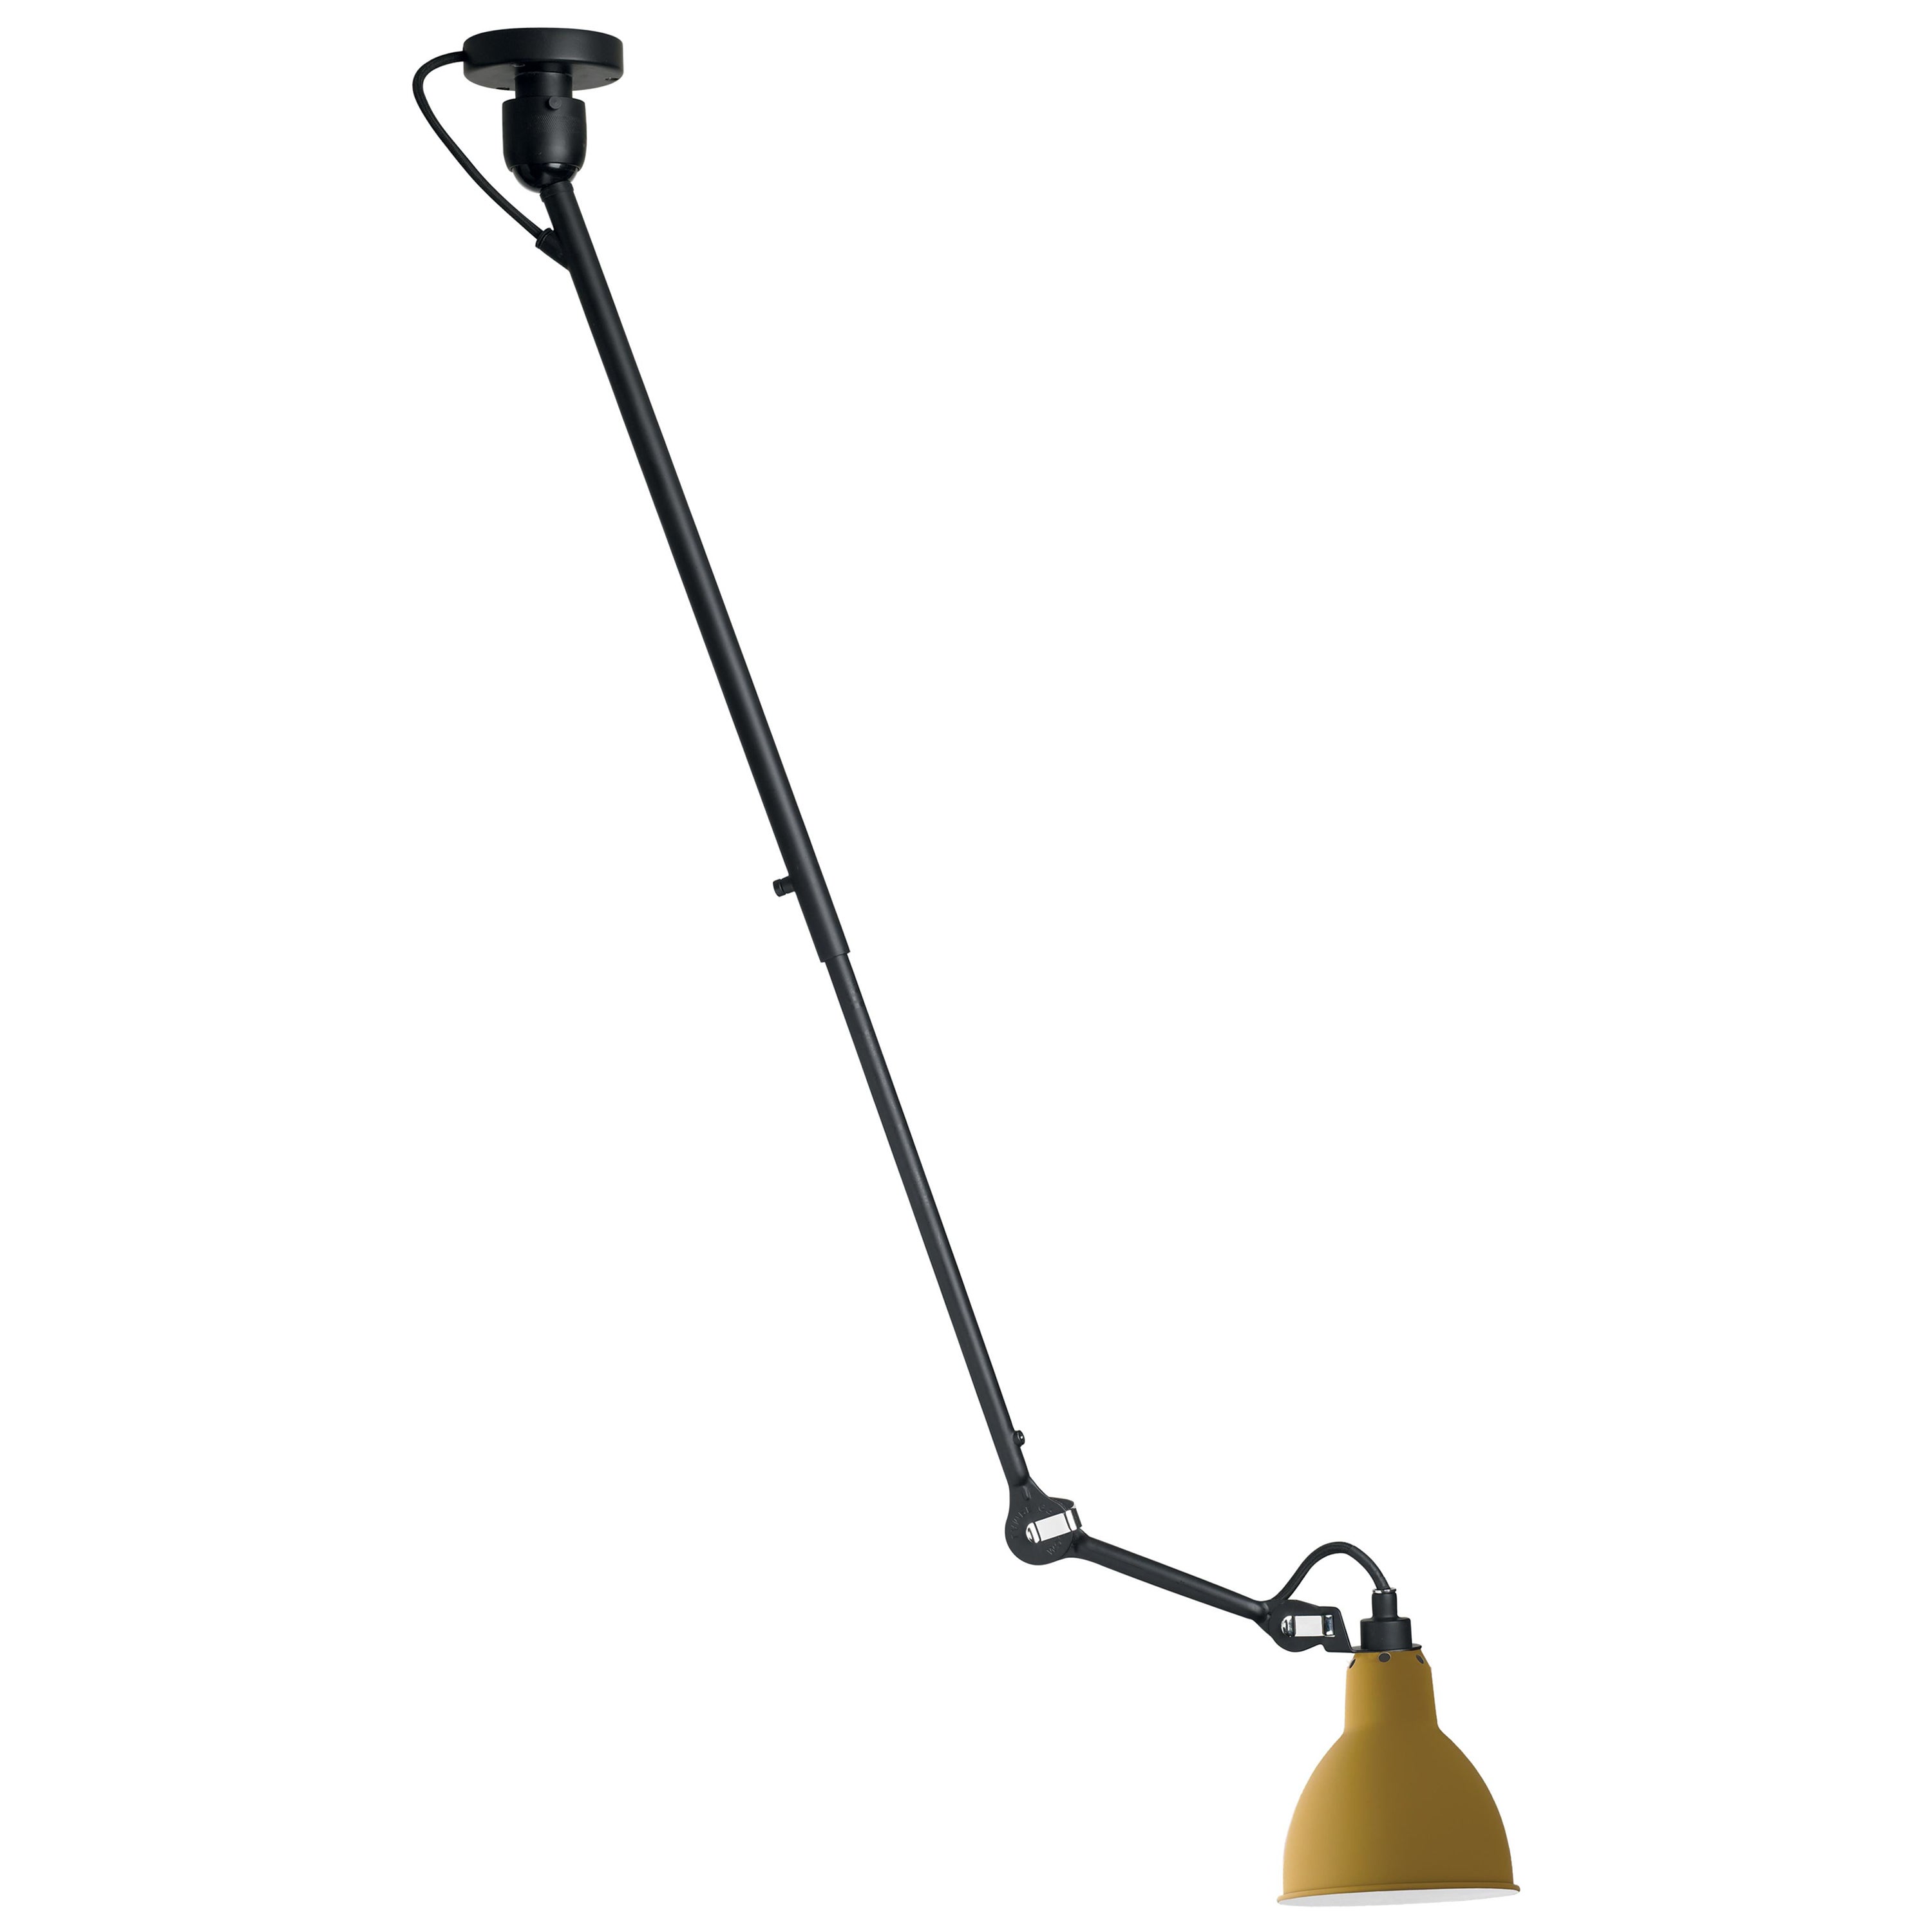 DCW Editions La Lampe Gras N°302 Pendant Light in Black Arm and Yellow Shade For Sale